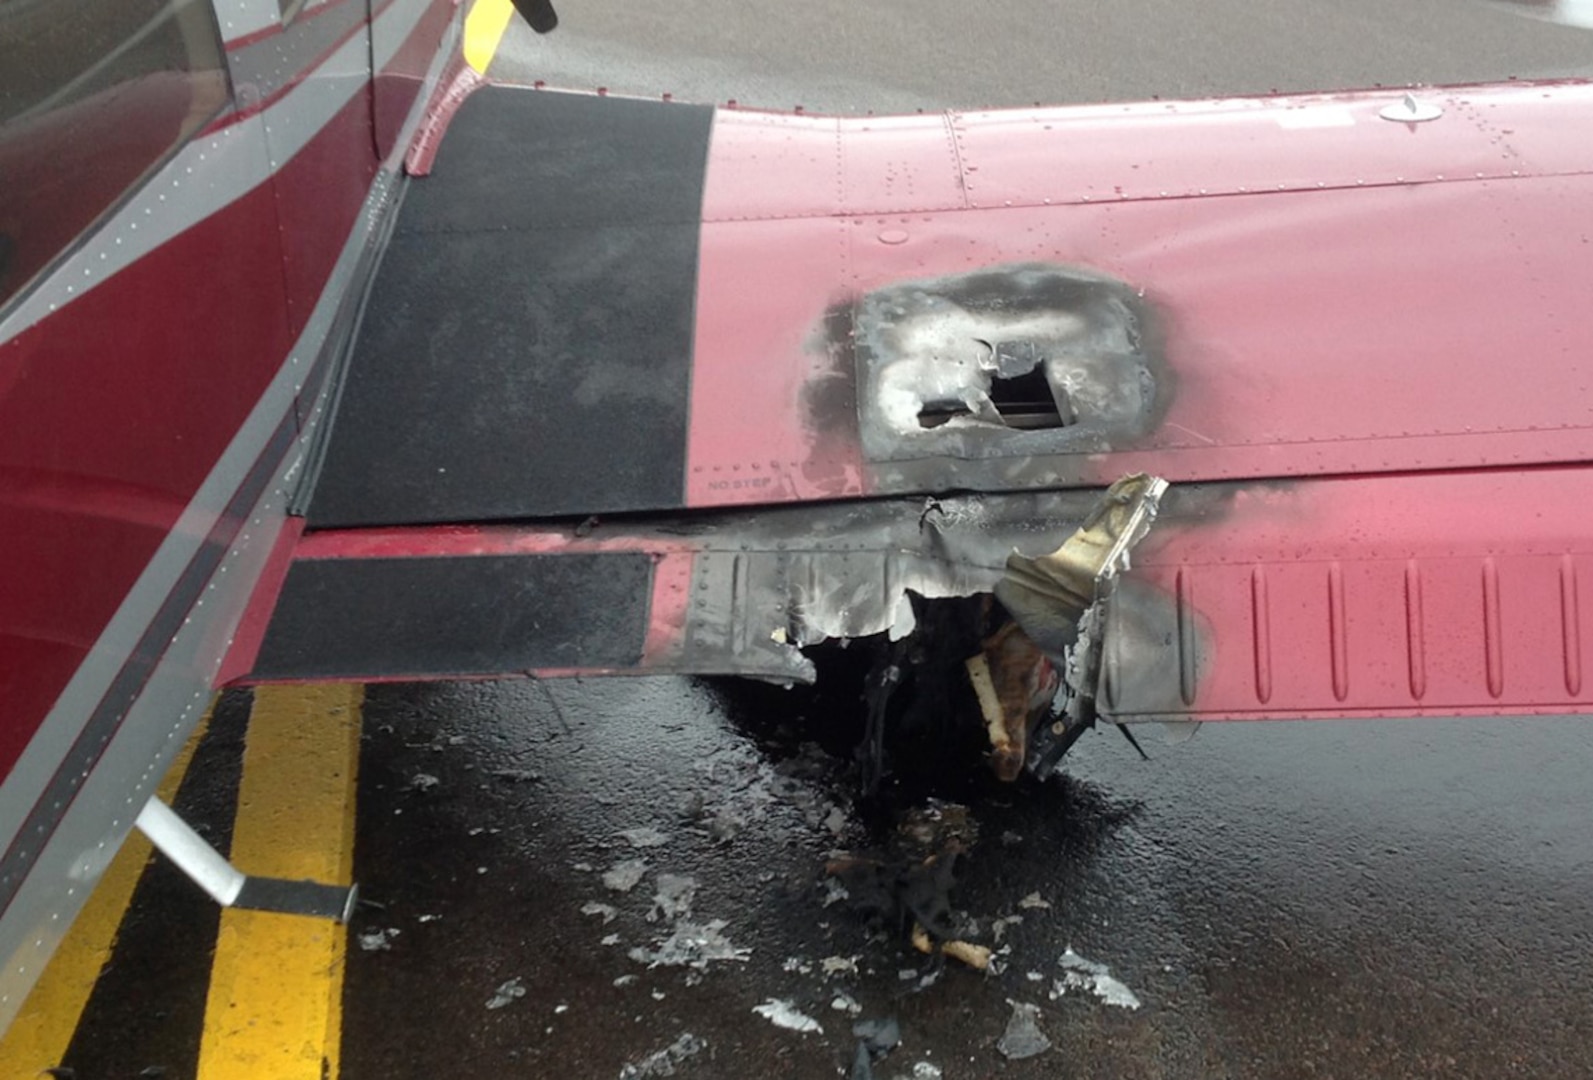 A photo taken in the aftermath of the 158th Fighter Wing Fire Department’s response to an aircraft fire shows damage to the aircraft’s fuselage. (courtesy photo)